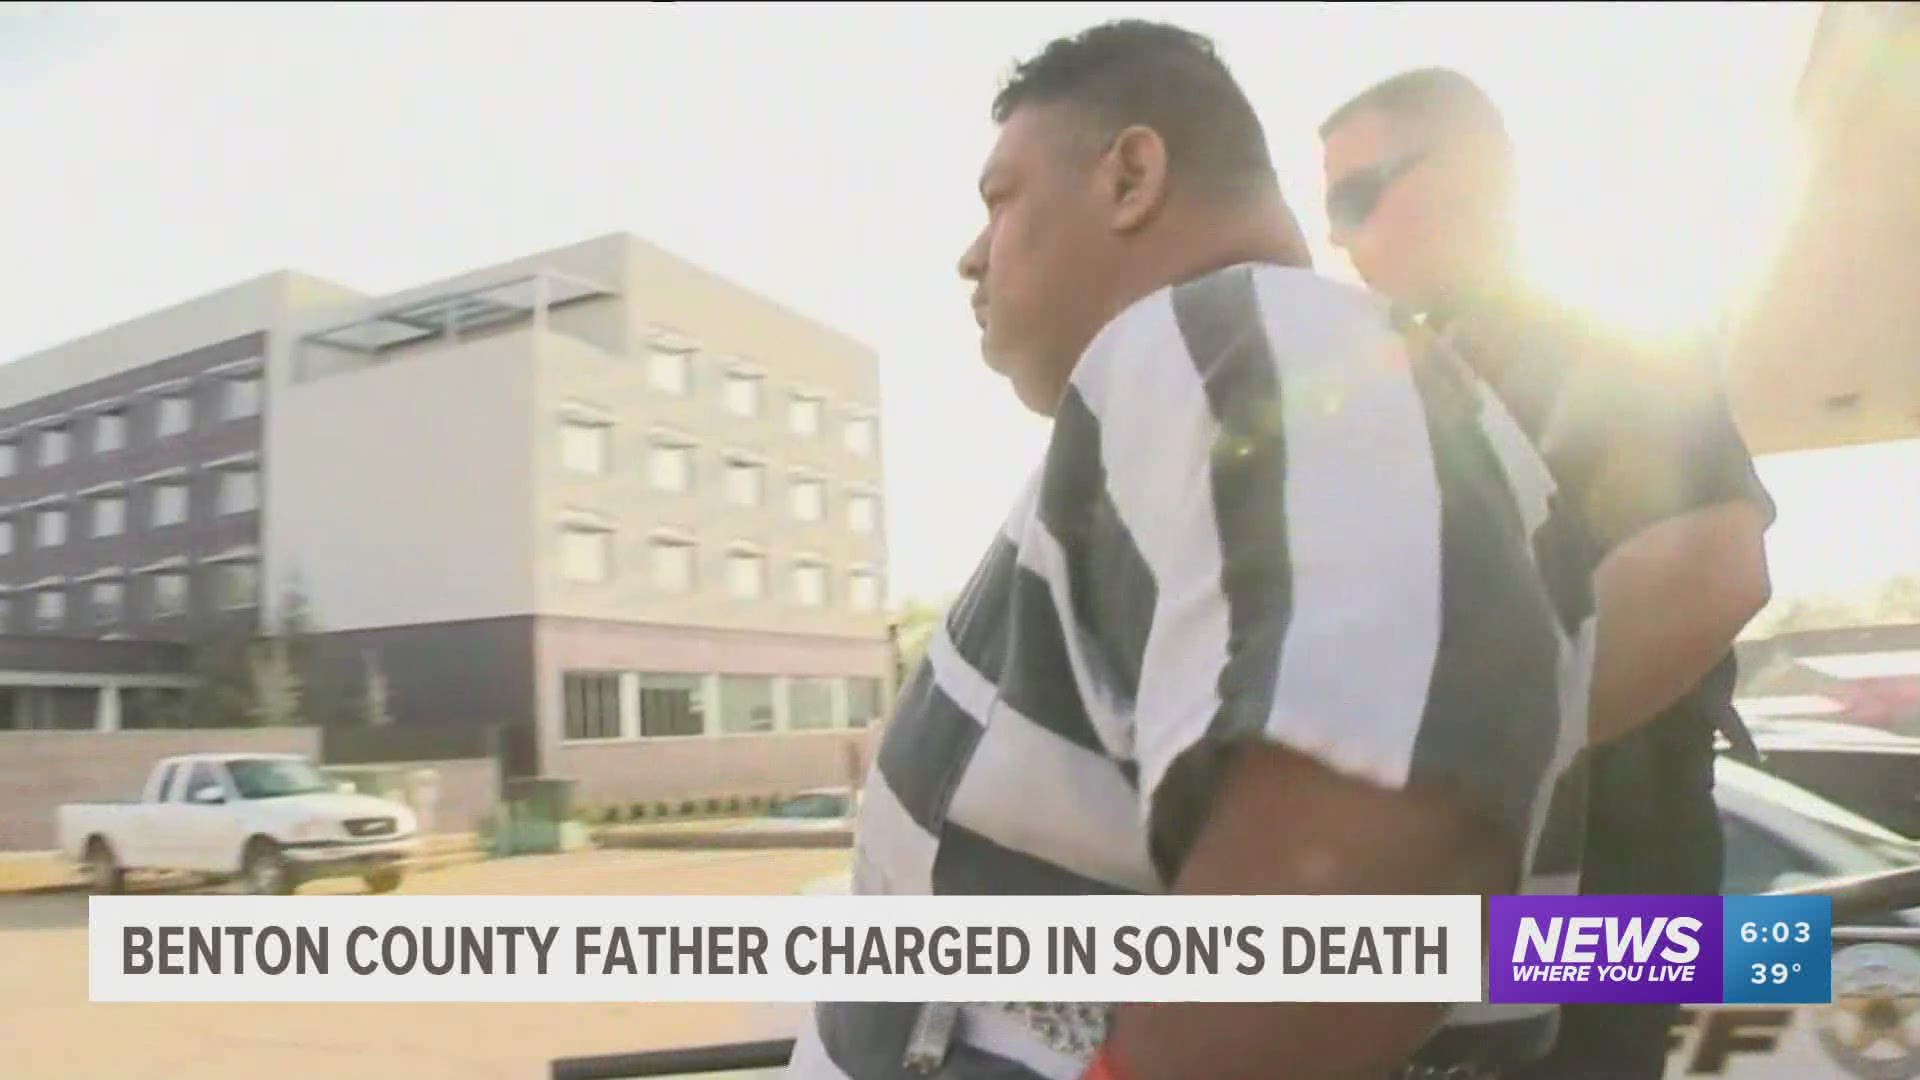 Benton County father charged in son's death